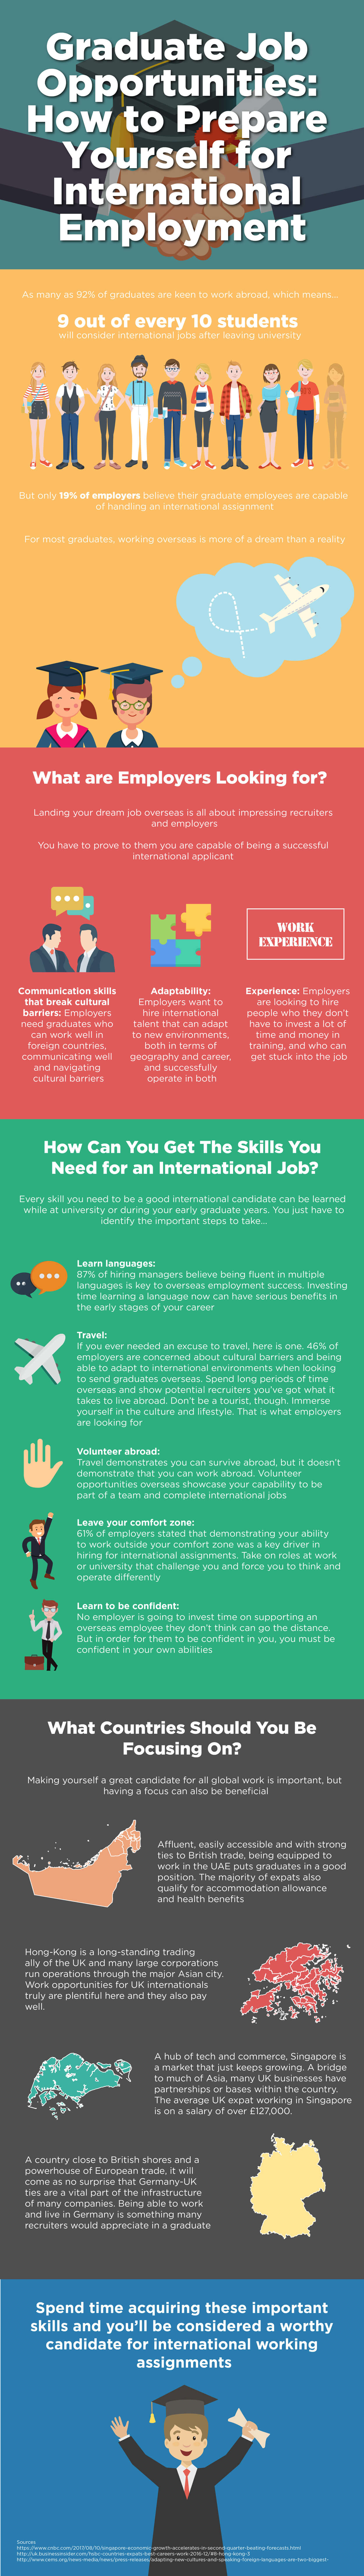 Graduate Job Opportunities How to Prepare Yourself for International-infographic-plaza